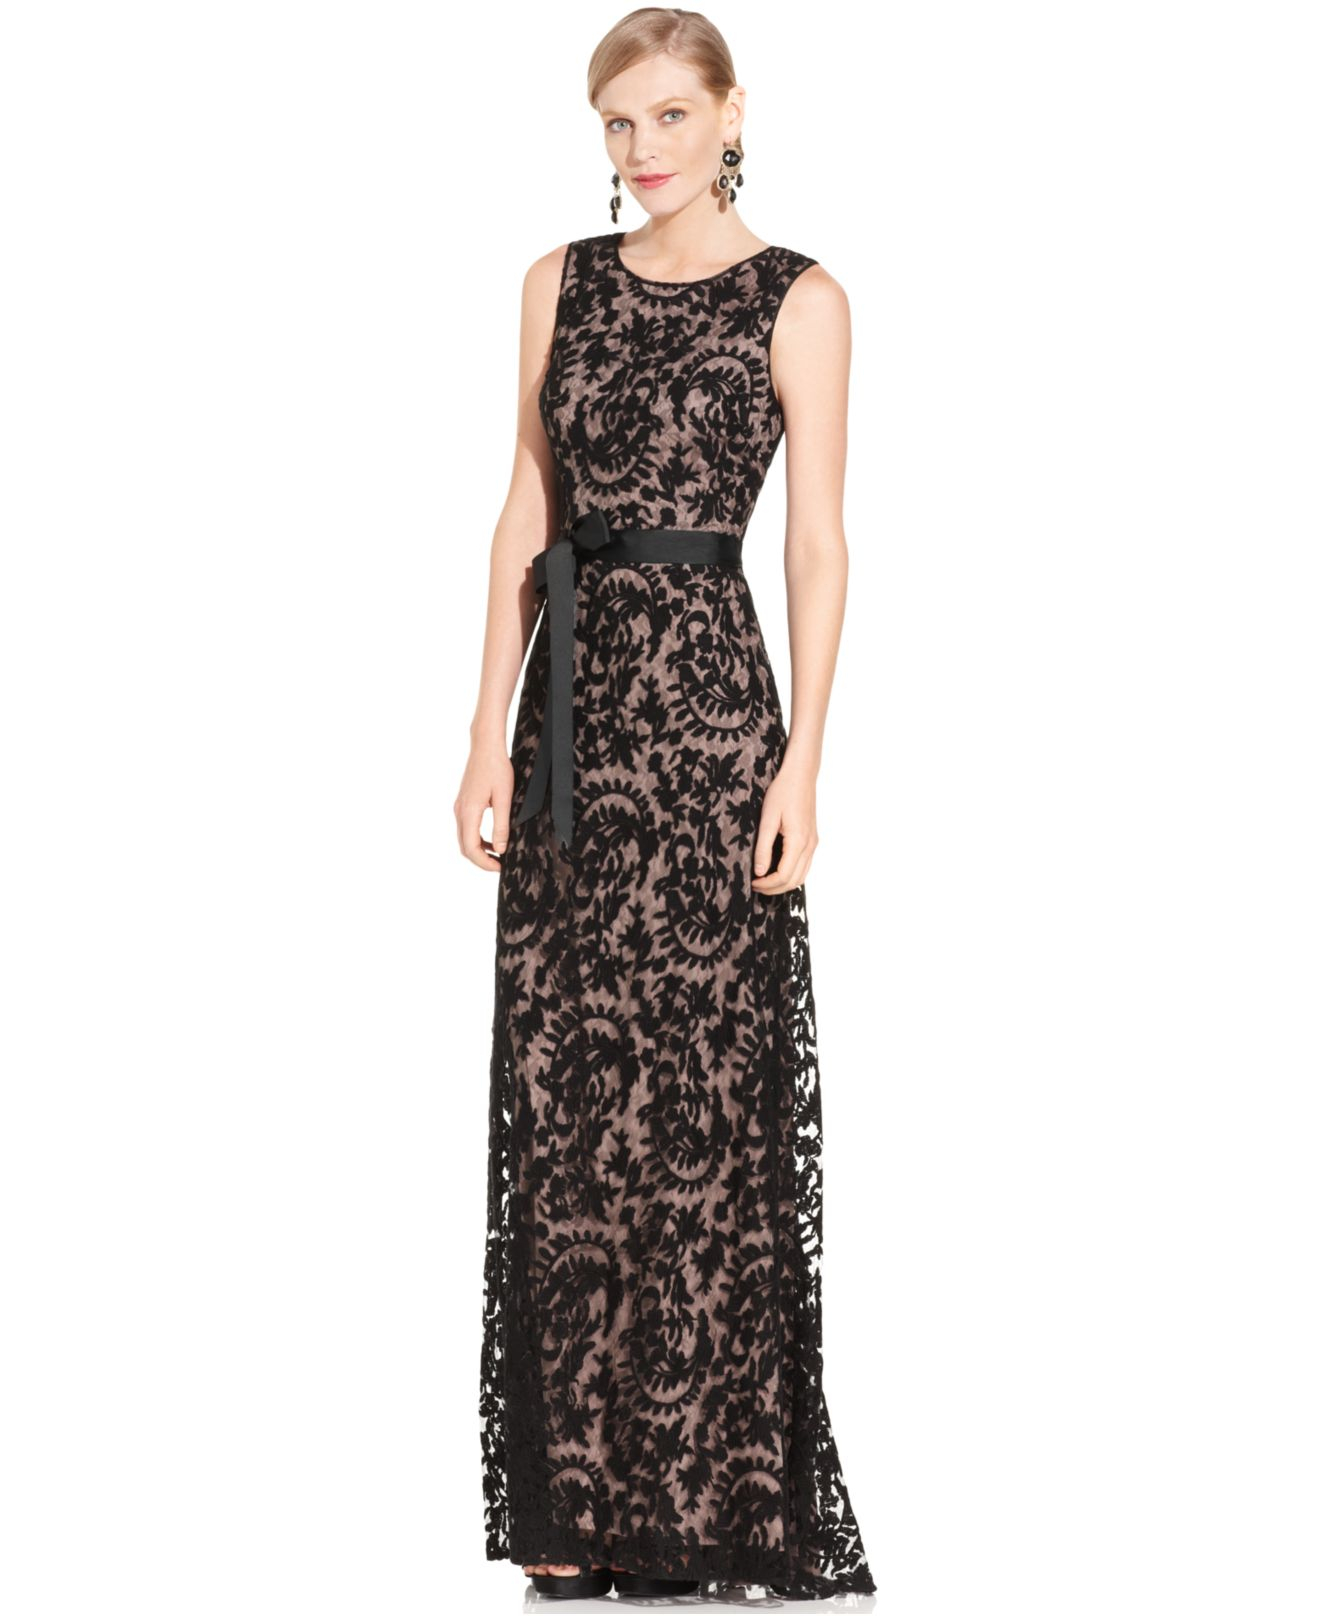 Adrianna Papell Petite Sleeveless Lace Gown in Black - Lyst